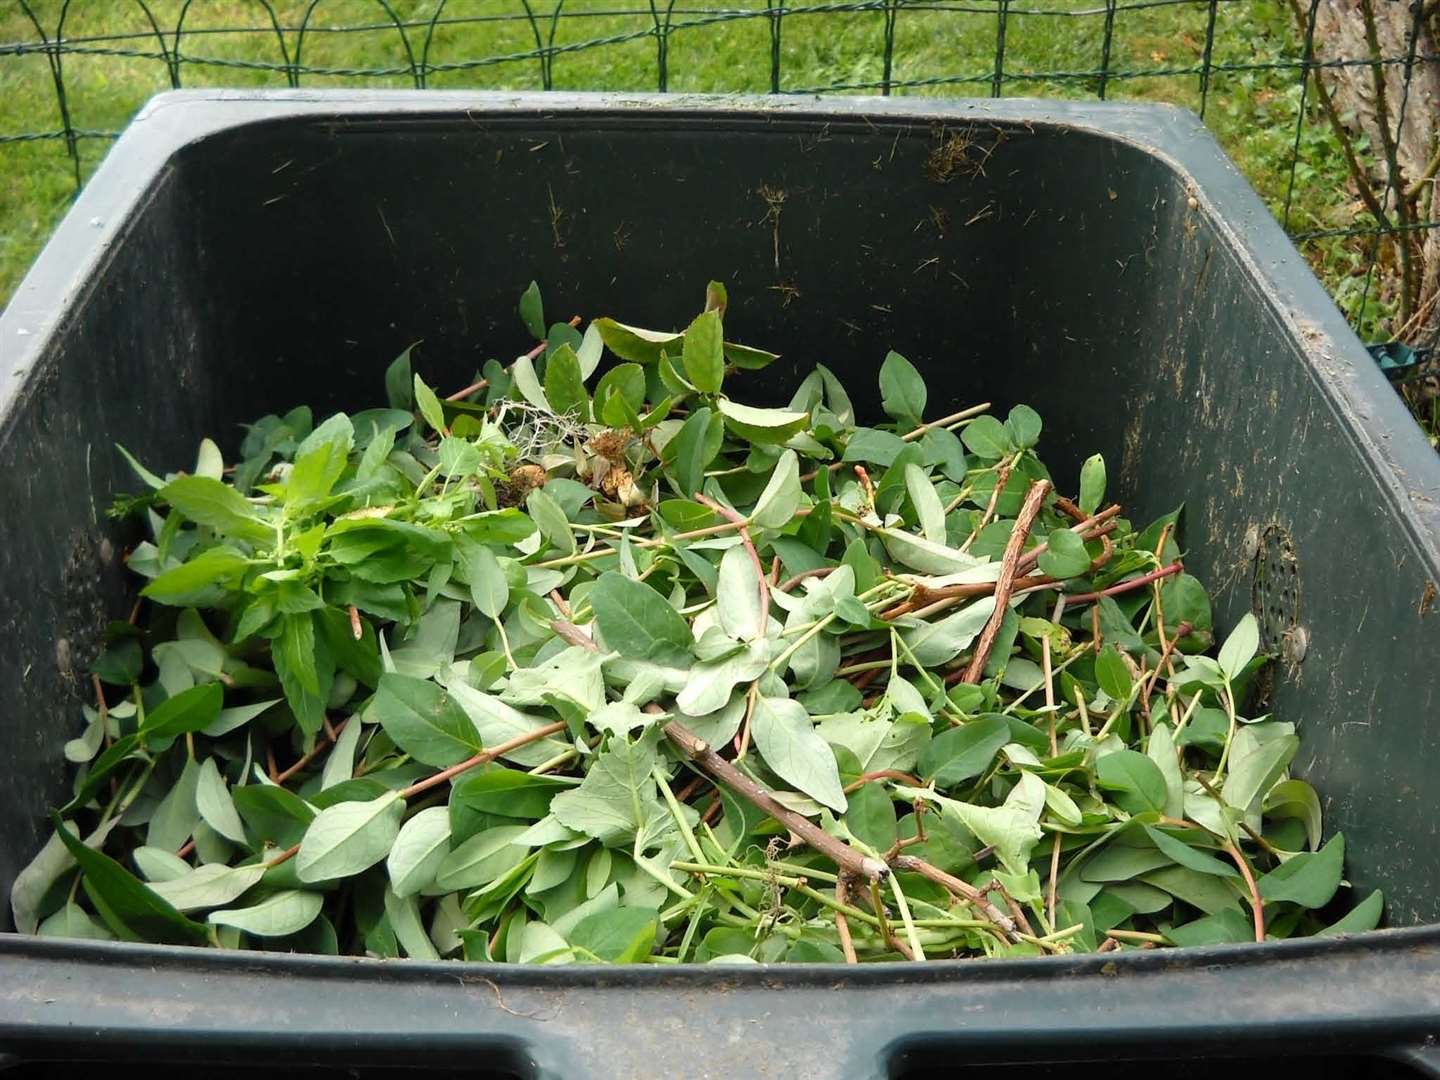 Garden waste collections could cost more